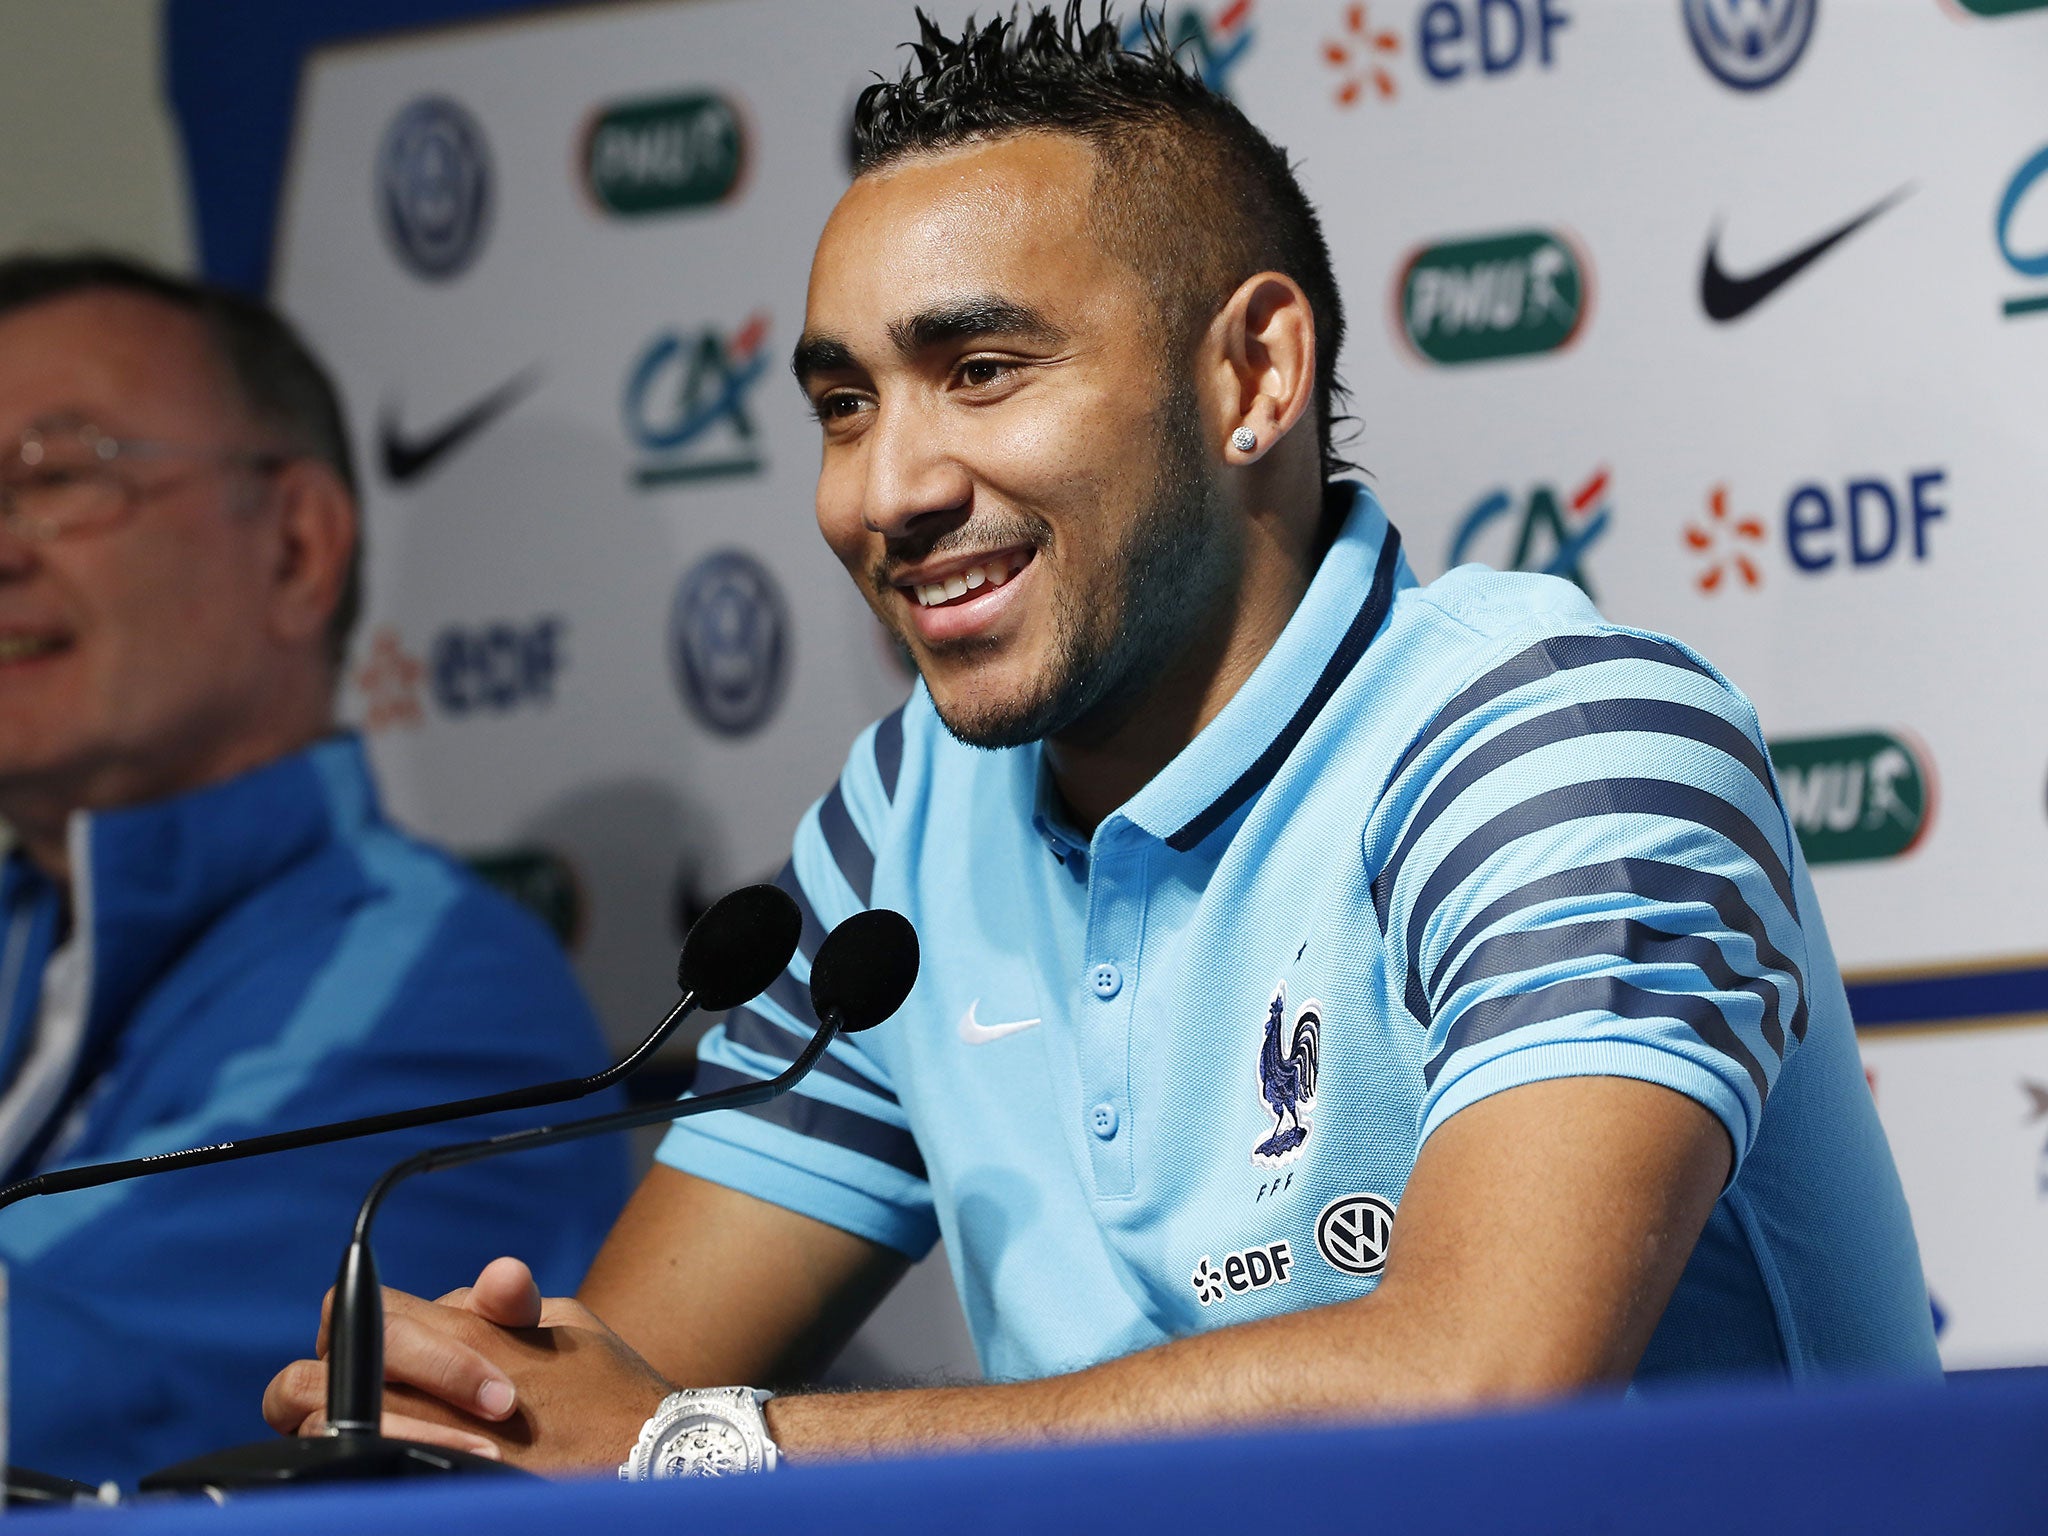 Payet has made 15 appearances for France since his debut in 2010